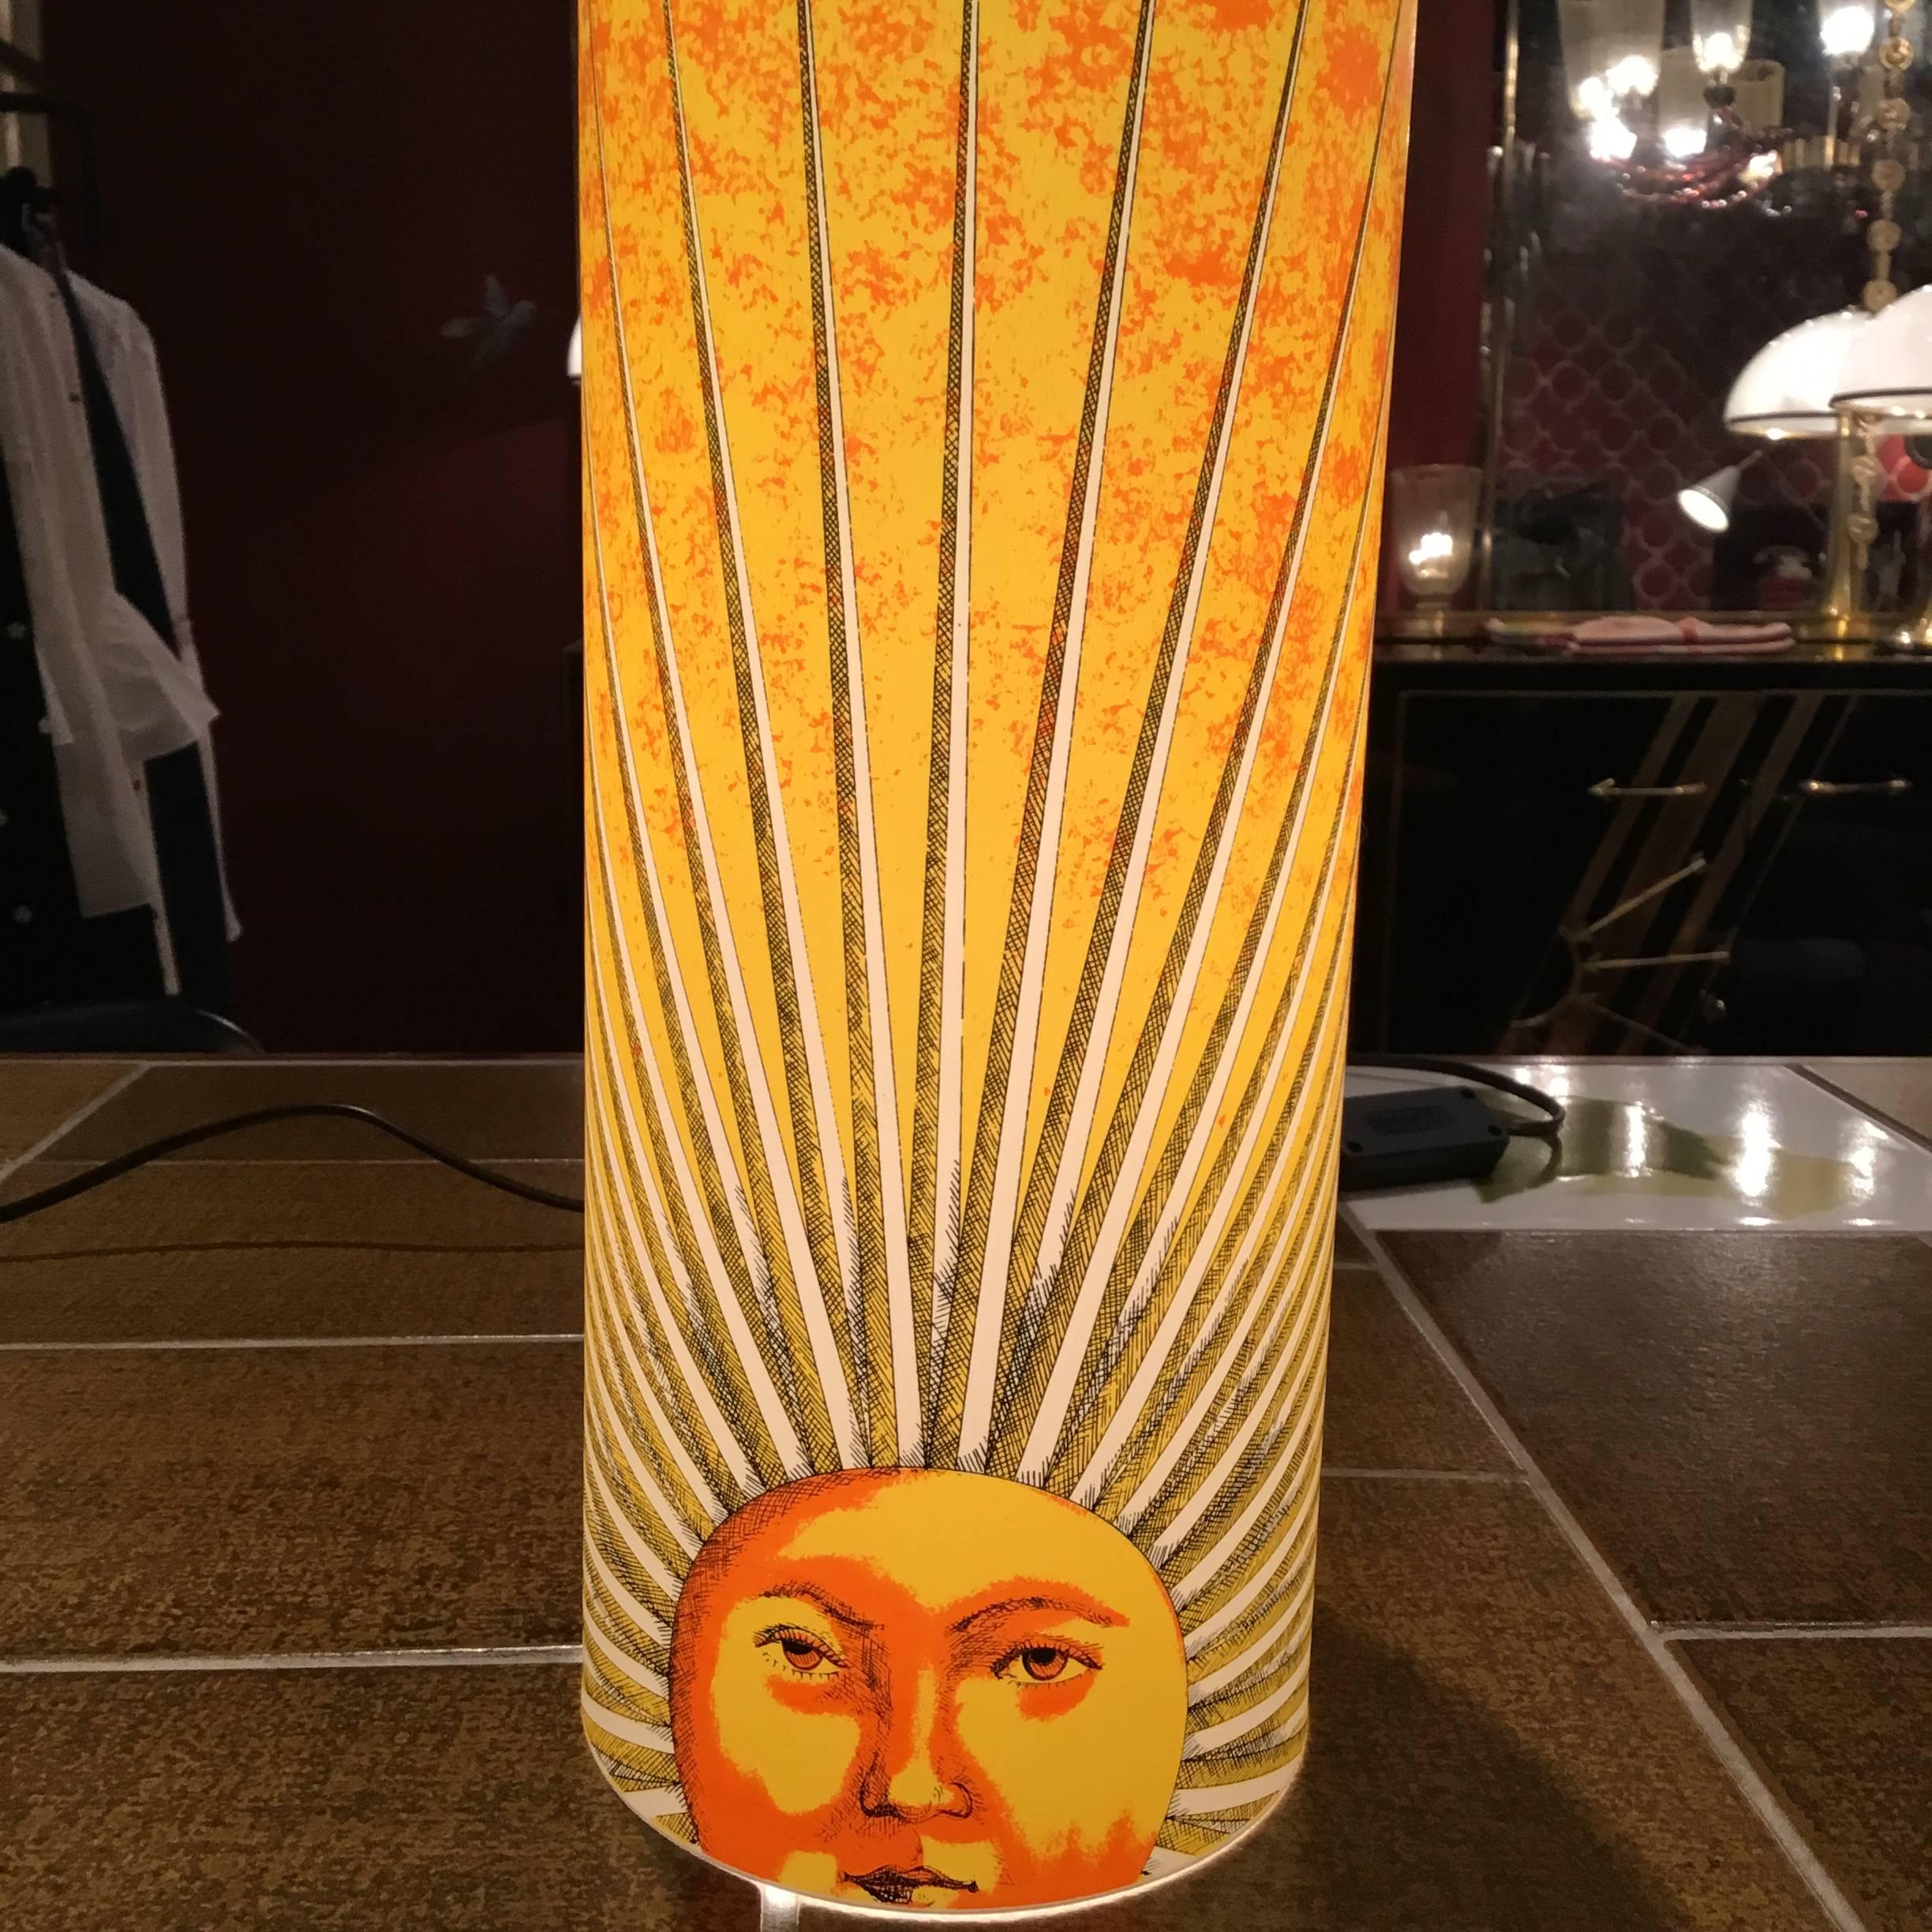 Barnaba Fornasetti, son of Piero Fornasetti design these beautifull tamble lamp for Antonangeli.
Produce in the 1990 in Italy this is the model 